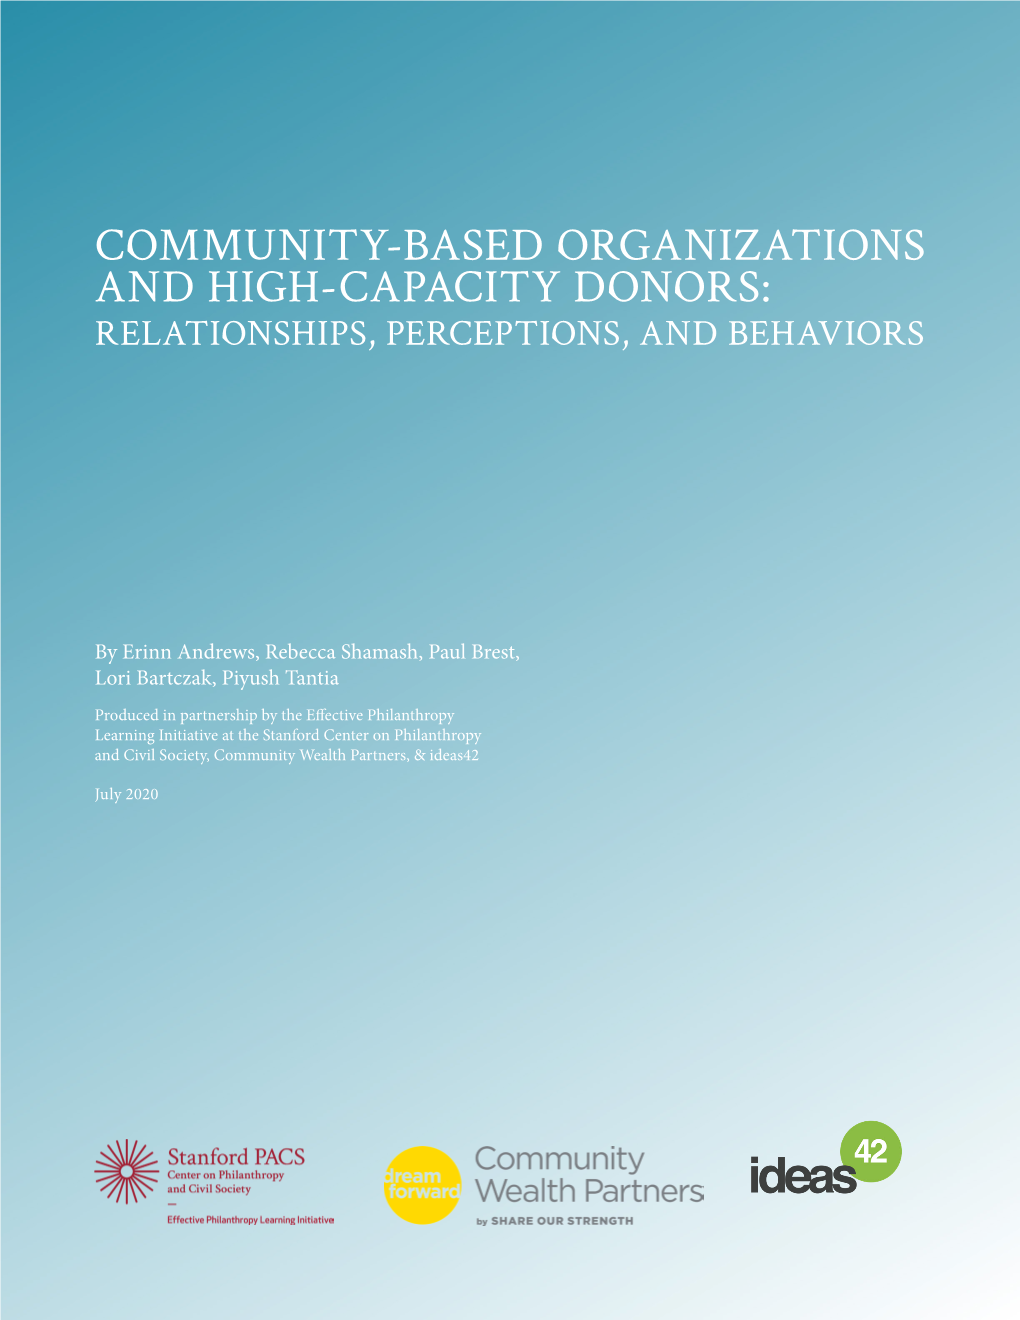 Community-Based Organizations and High-Capacity Donors: Relationships, Perceptions, and Behaviors